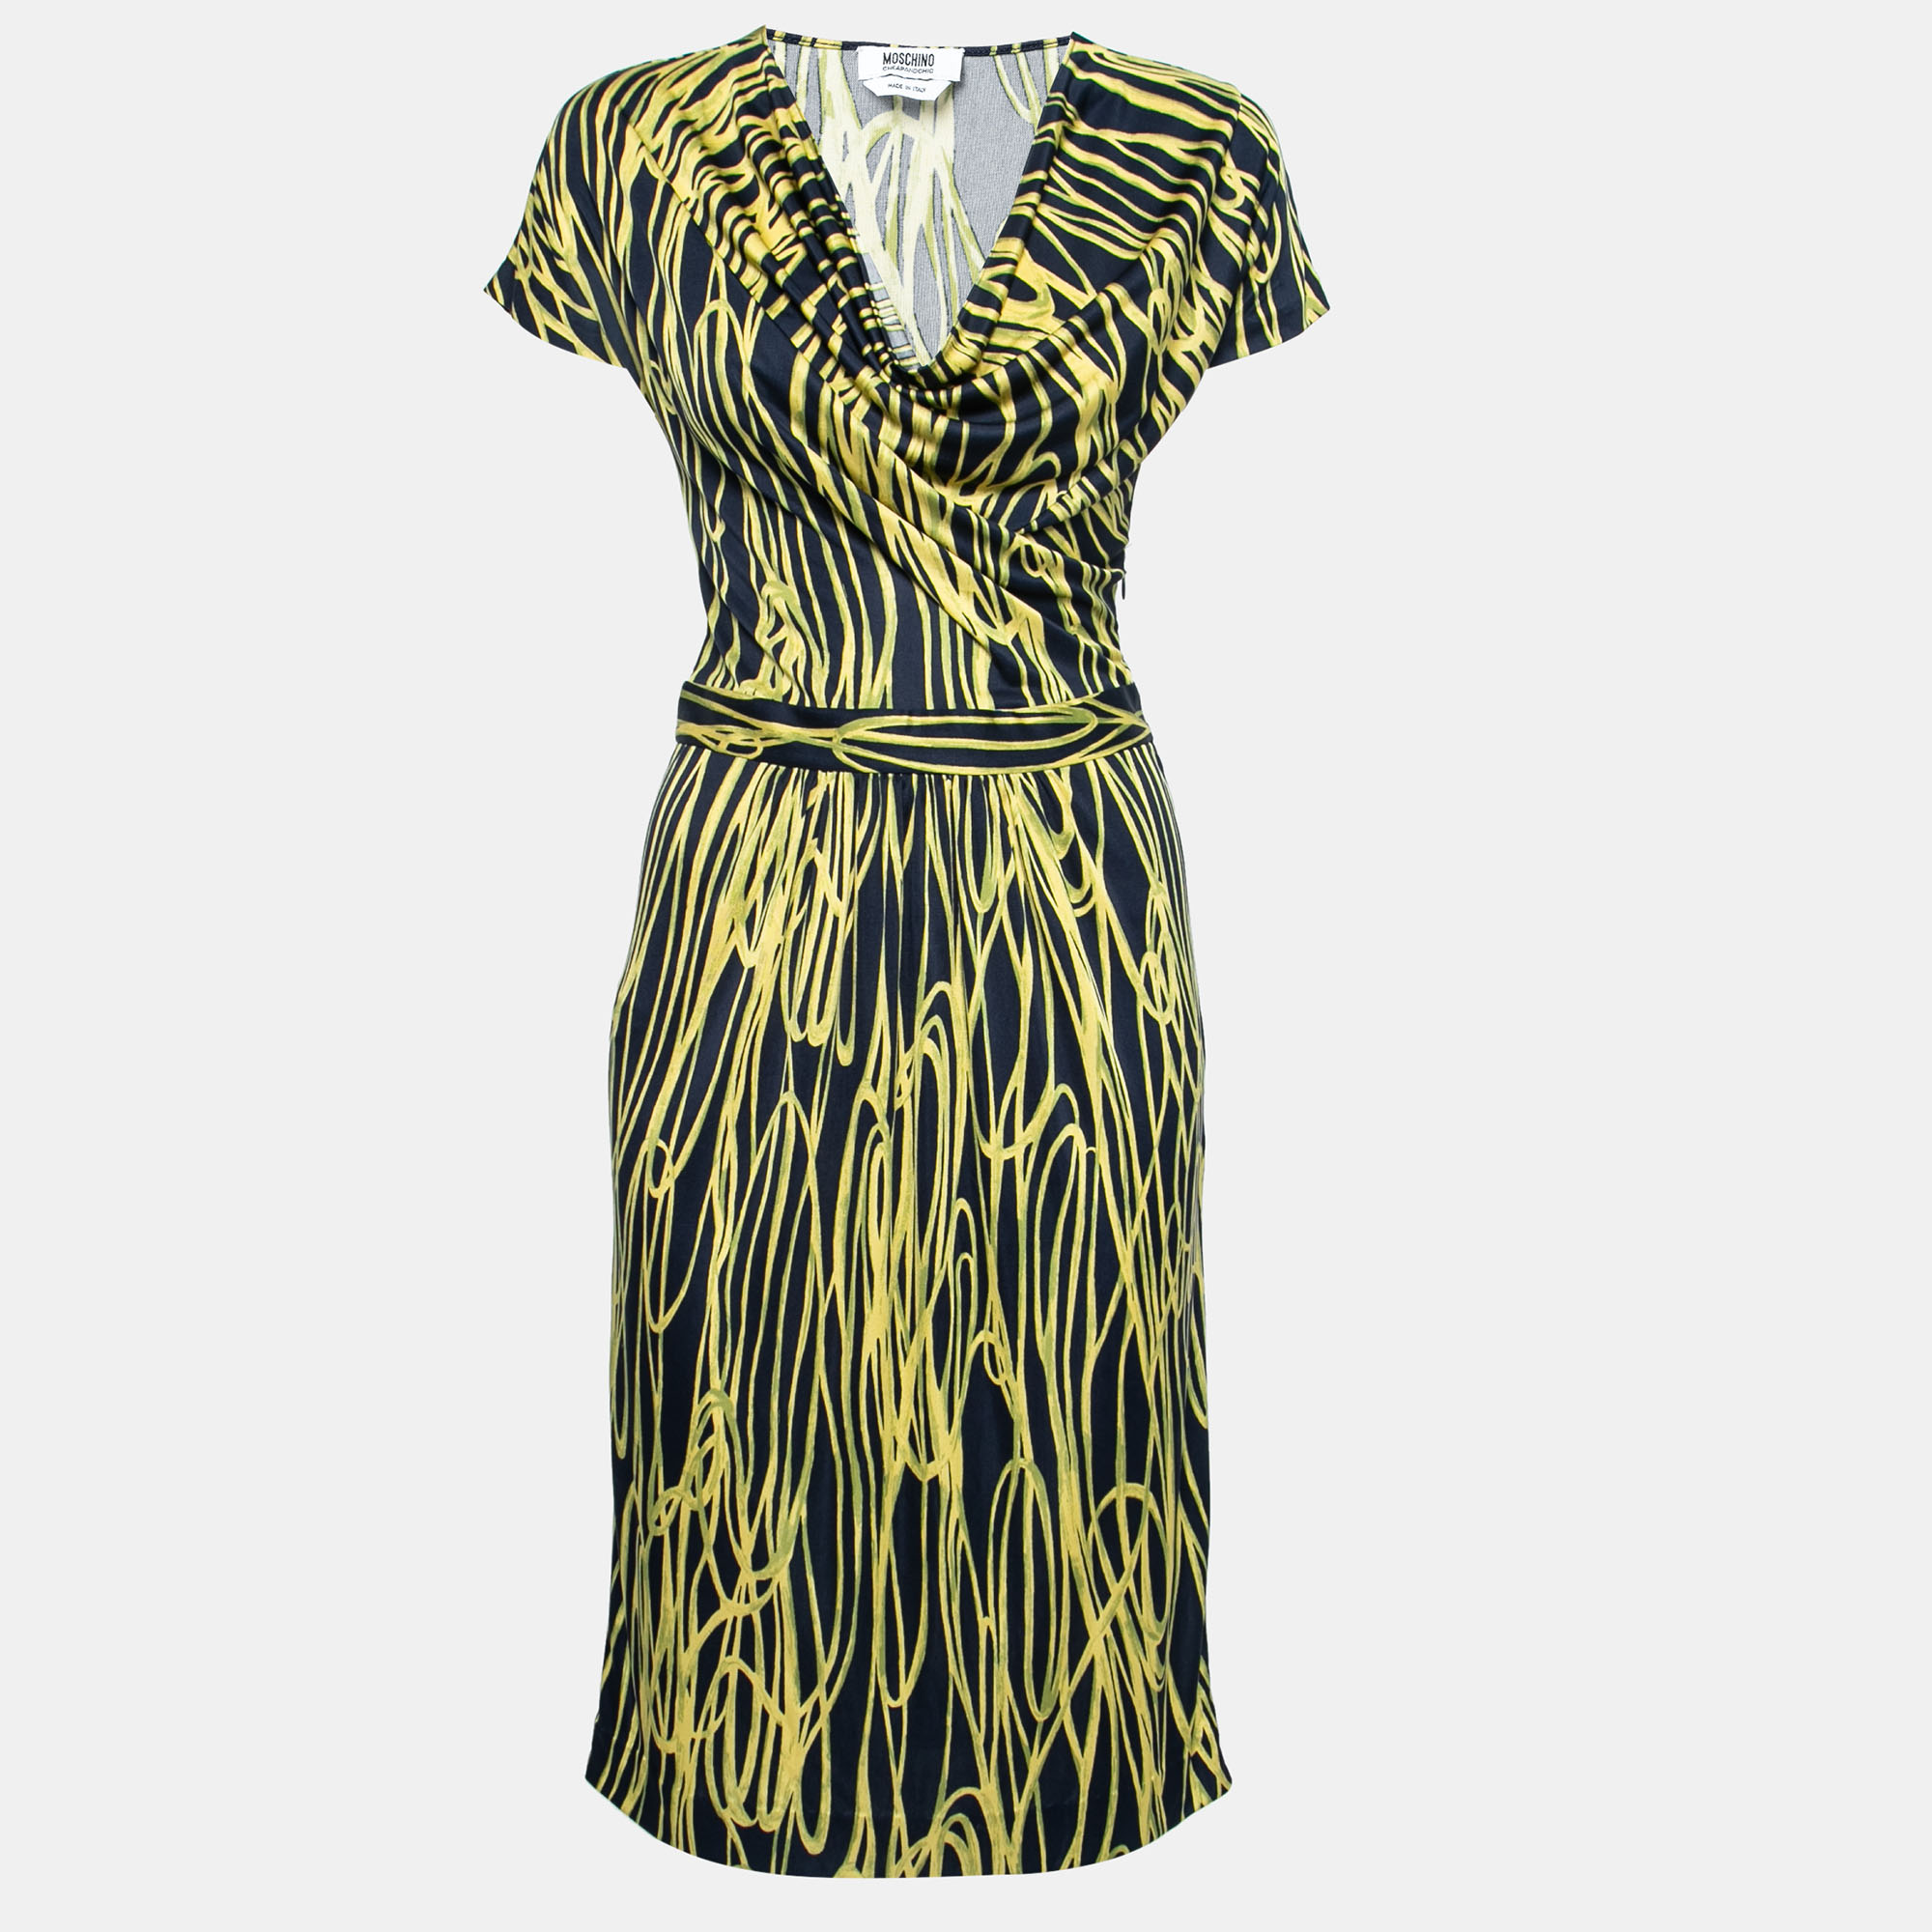 Moschino Cheap and Chic Navy Blue & Yellow Printed Silk Jersey Dress S